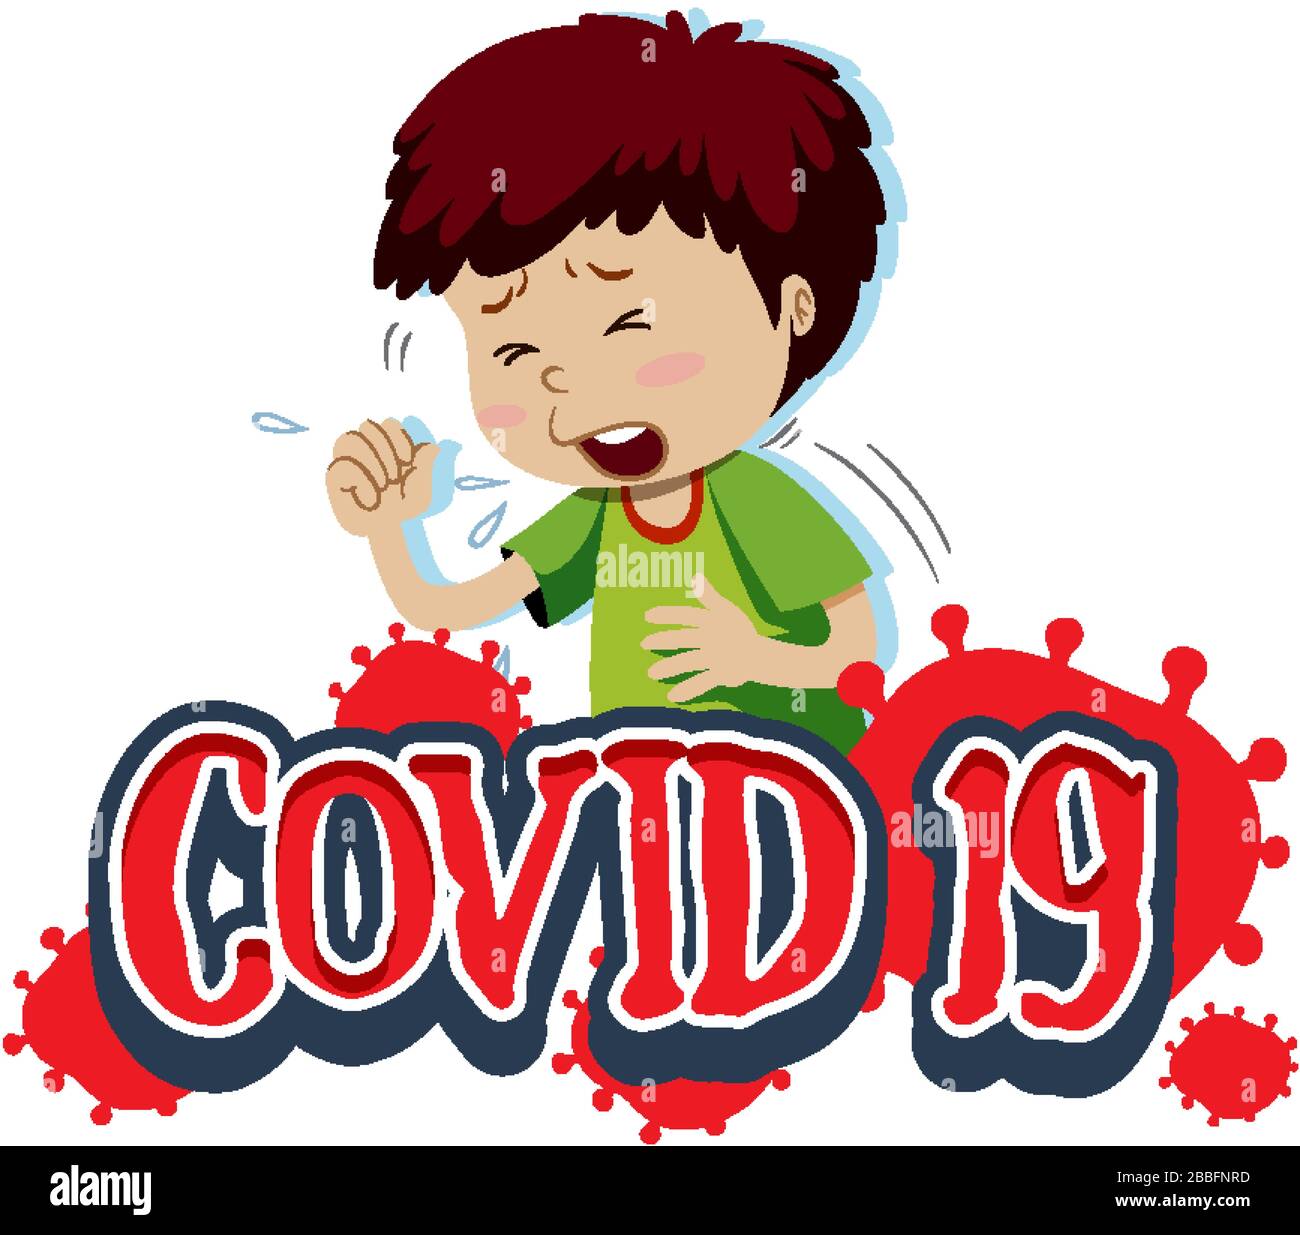 Covid 19 sign template with boy coughing illustration Stock Vector